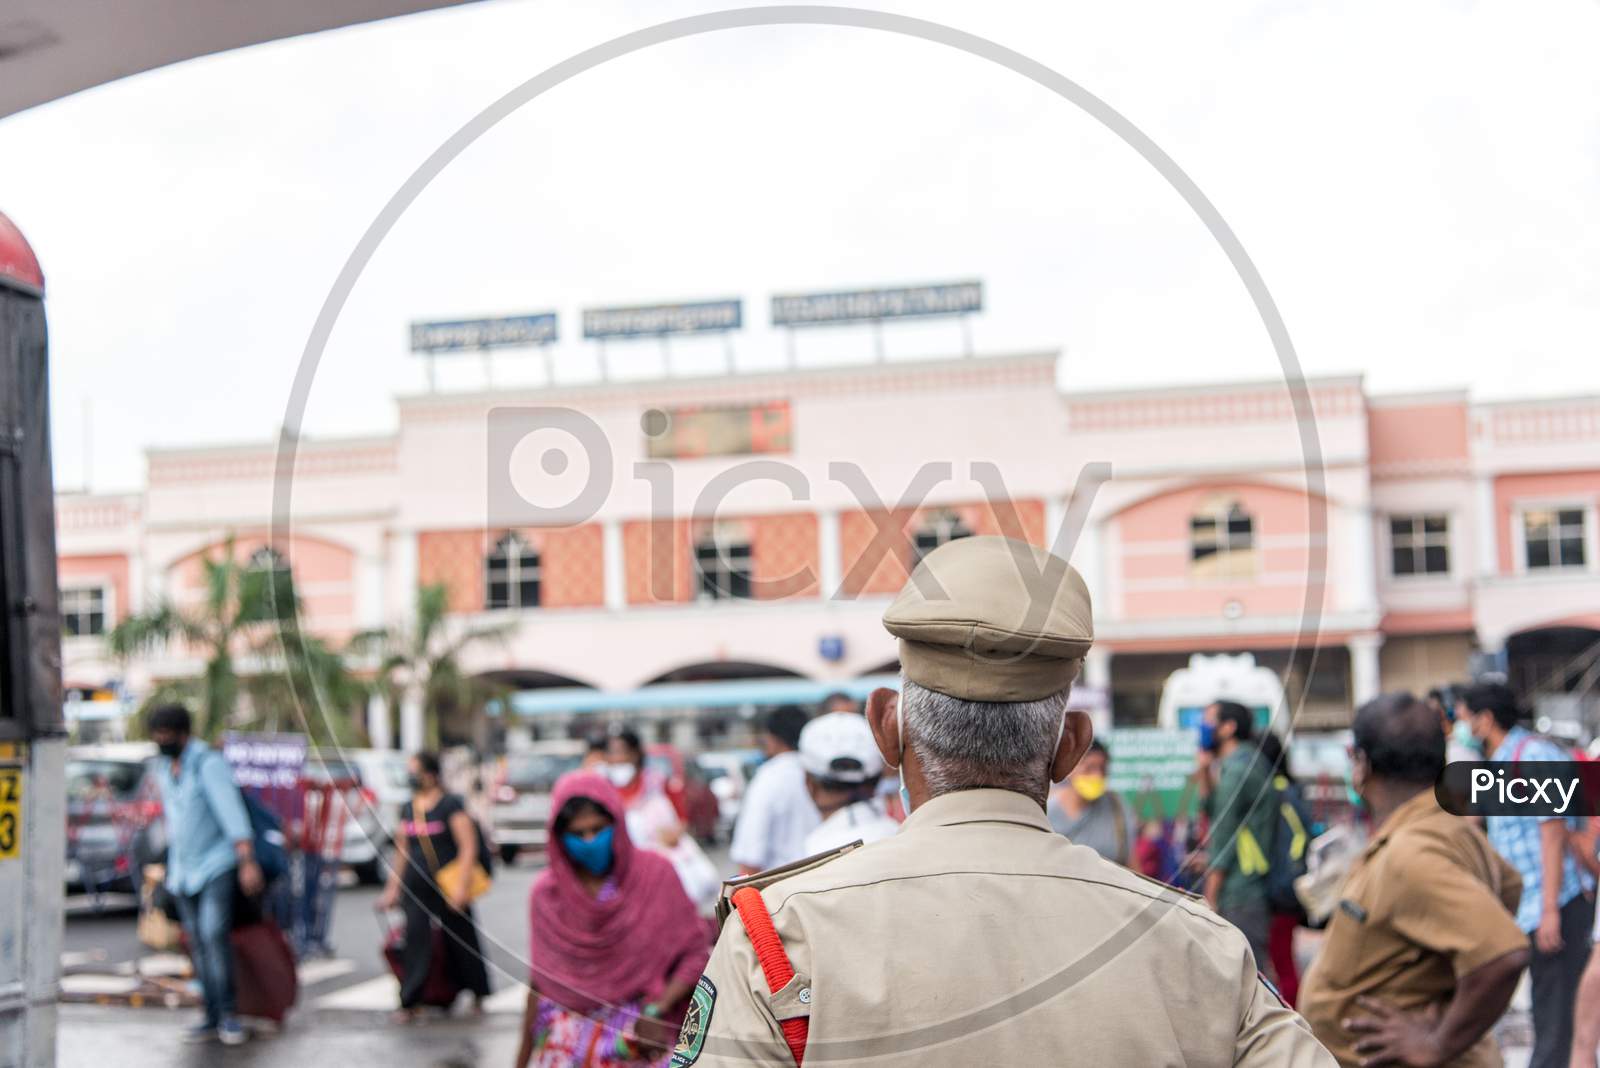 cops at railway station to guide people